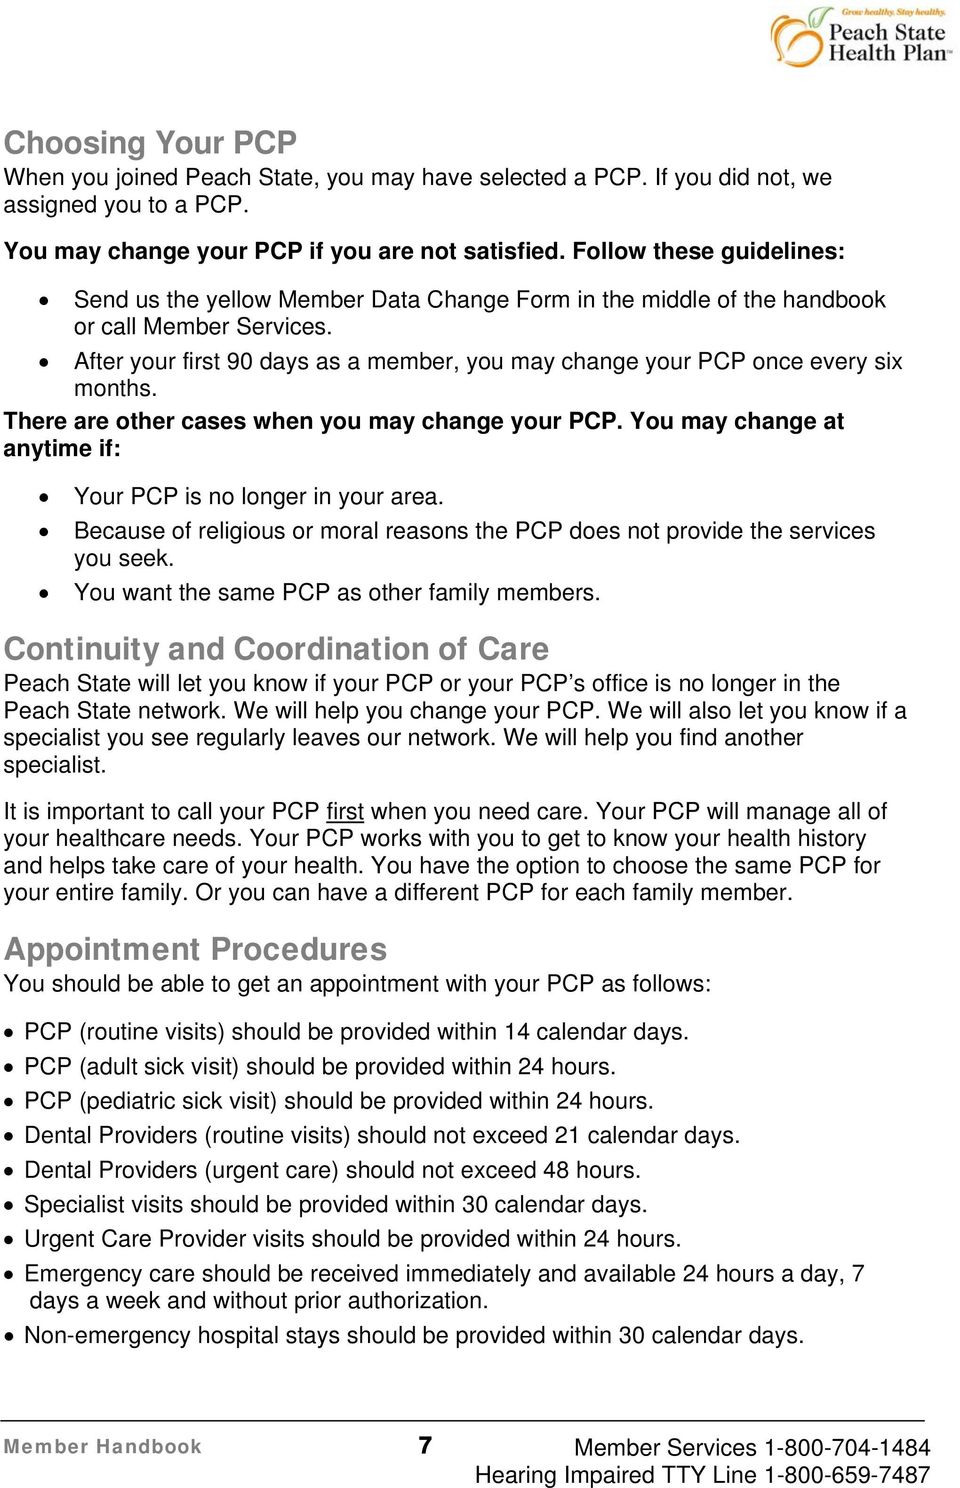 After your first 90 days as a member, you may change your PCP once every six months. There are other cases when you may change your PCP.